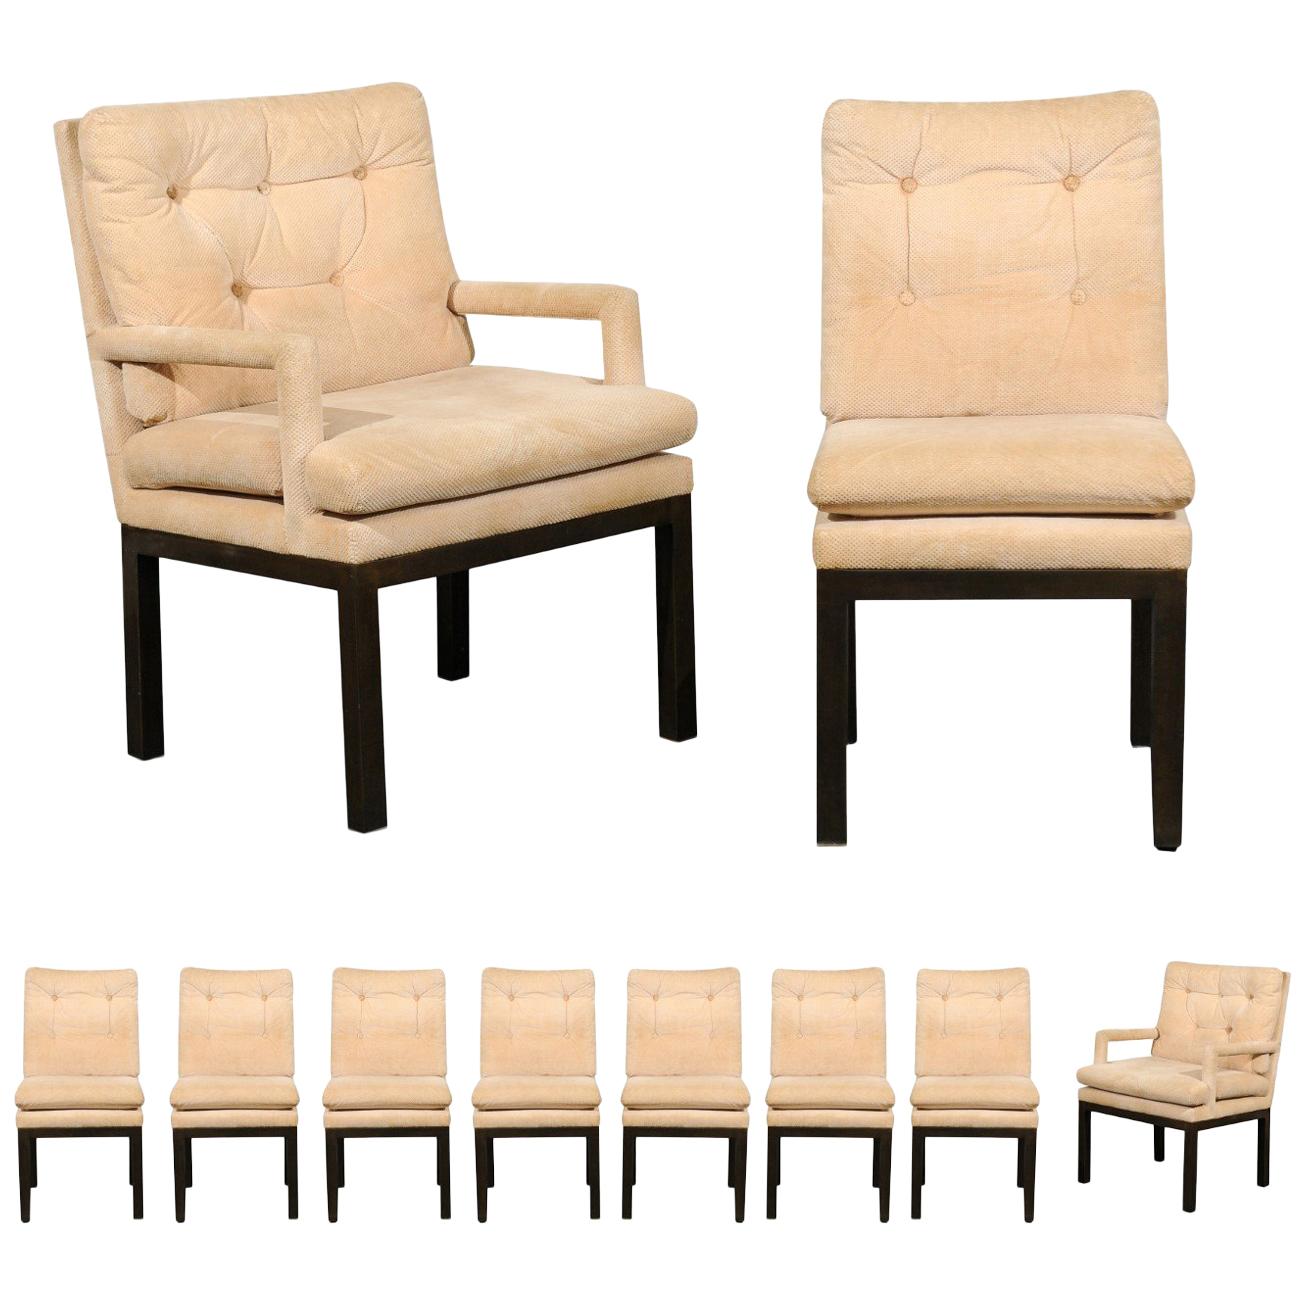 Sophisticated Set of 10 Brass Parsons Dining Chairs by John Stuart, circa 1968